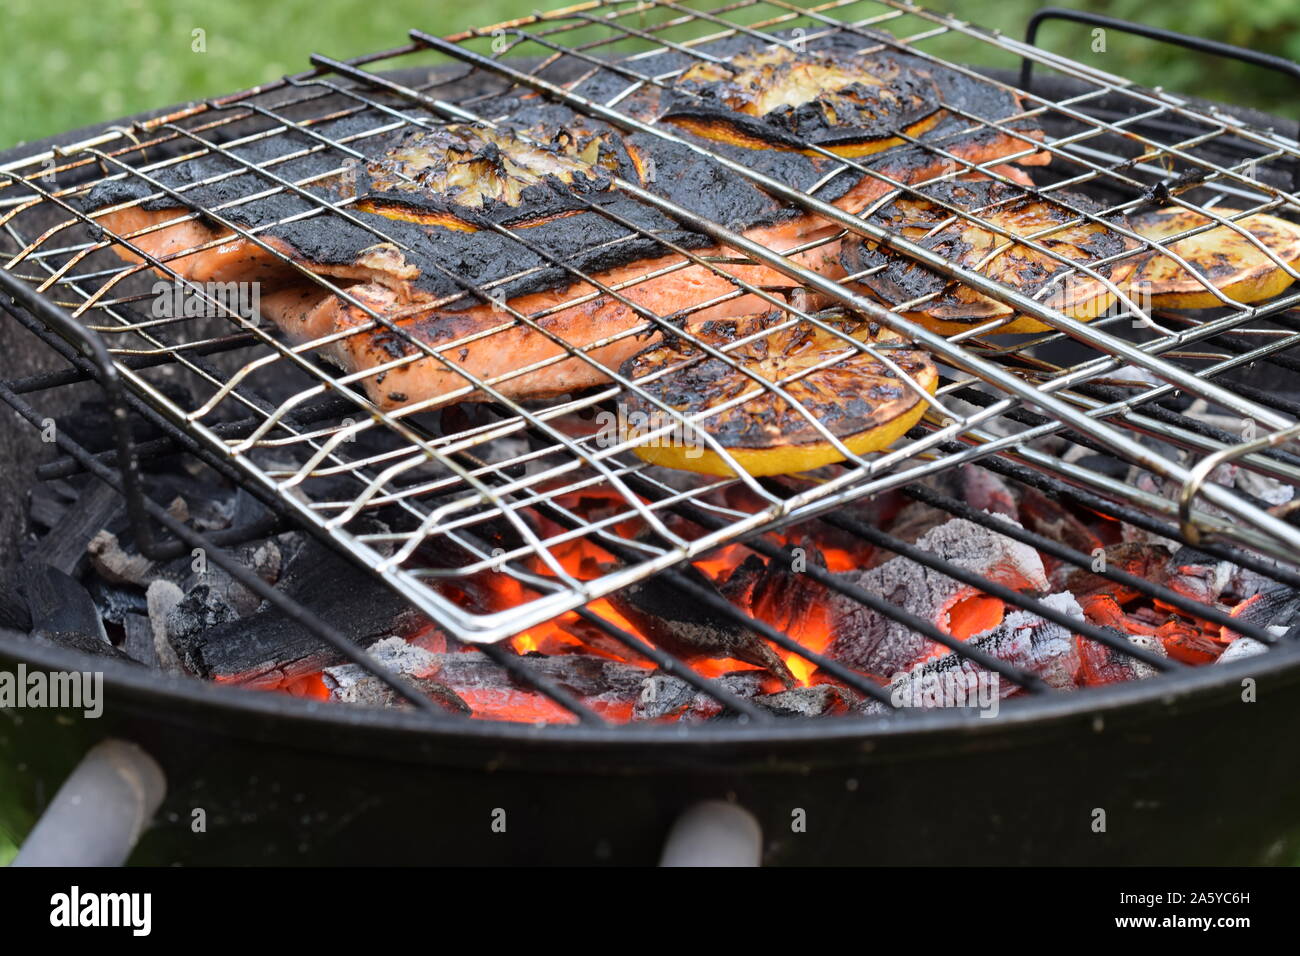 Grilling whole salmon fillets with gridiron. Fish and lemon slices are reaydy to eat. Skin is burned, but meat inside is ripe and juicy. Stock Photo